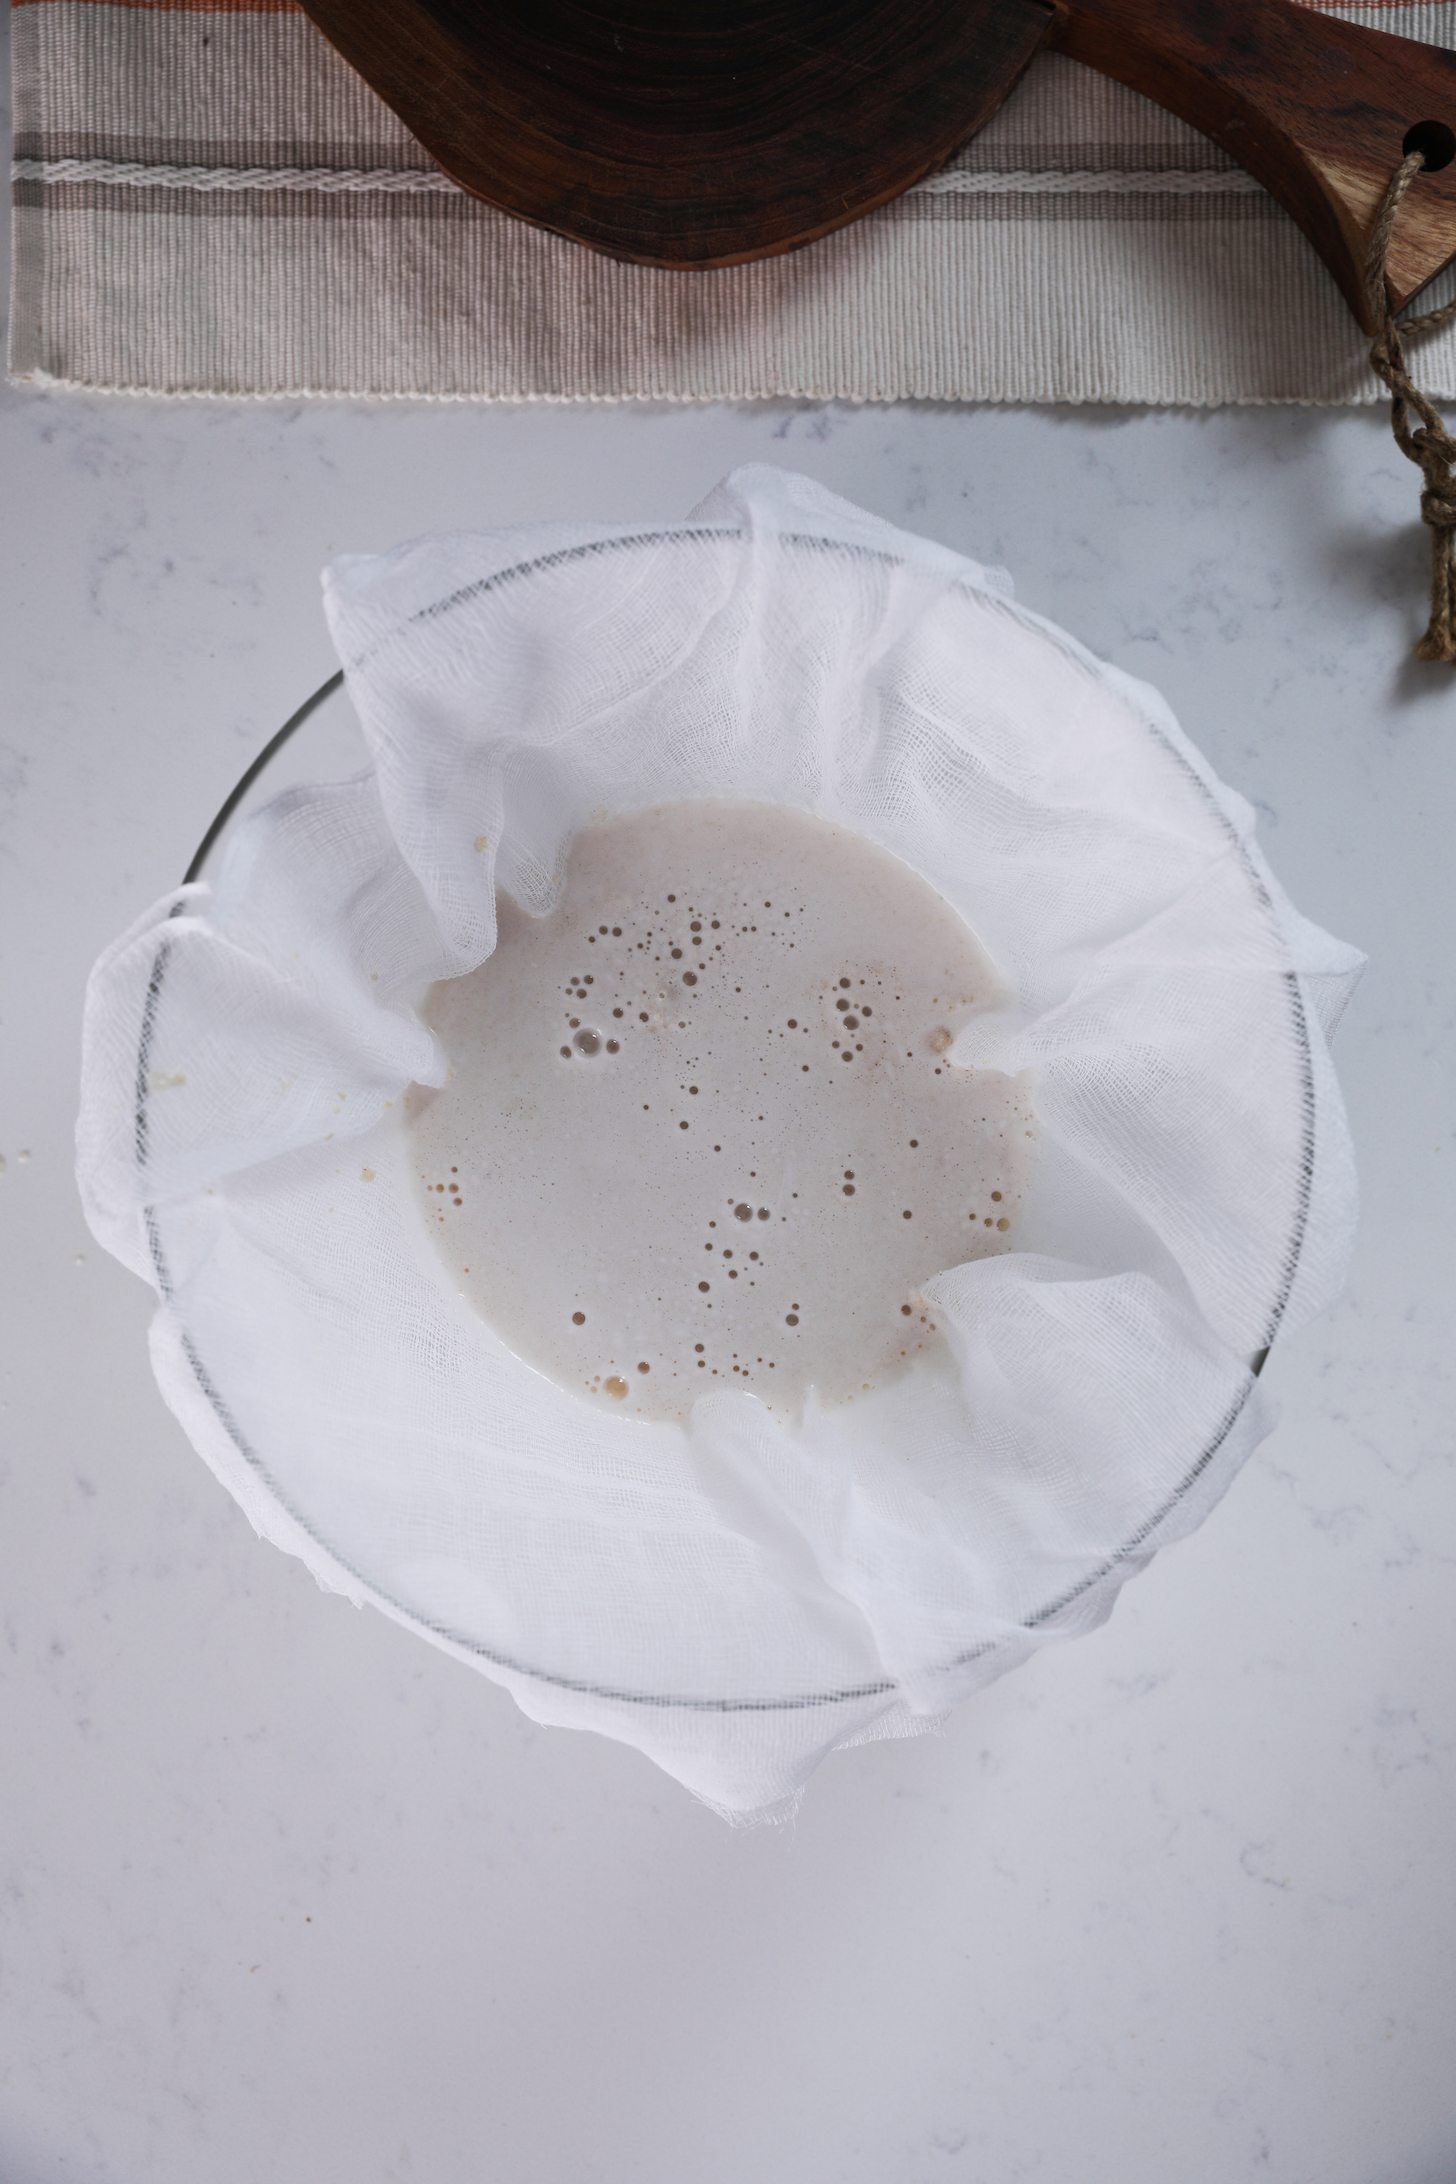 Overhead shot of a cheesecloth-lined bowl with milk in it.